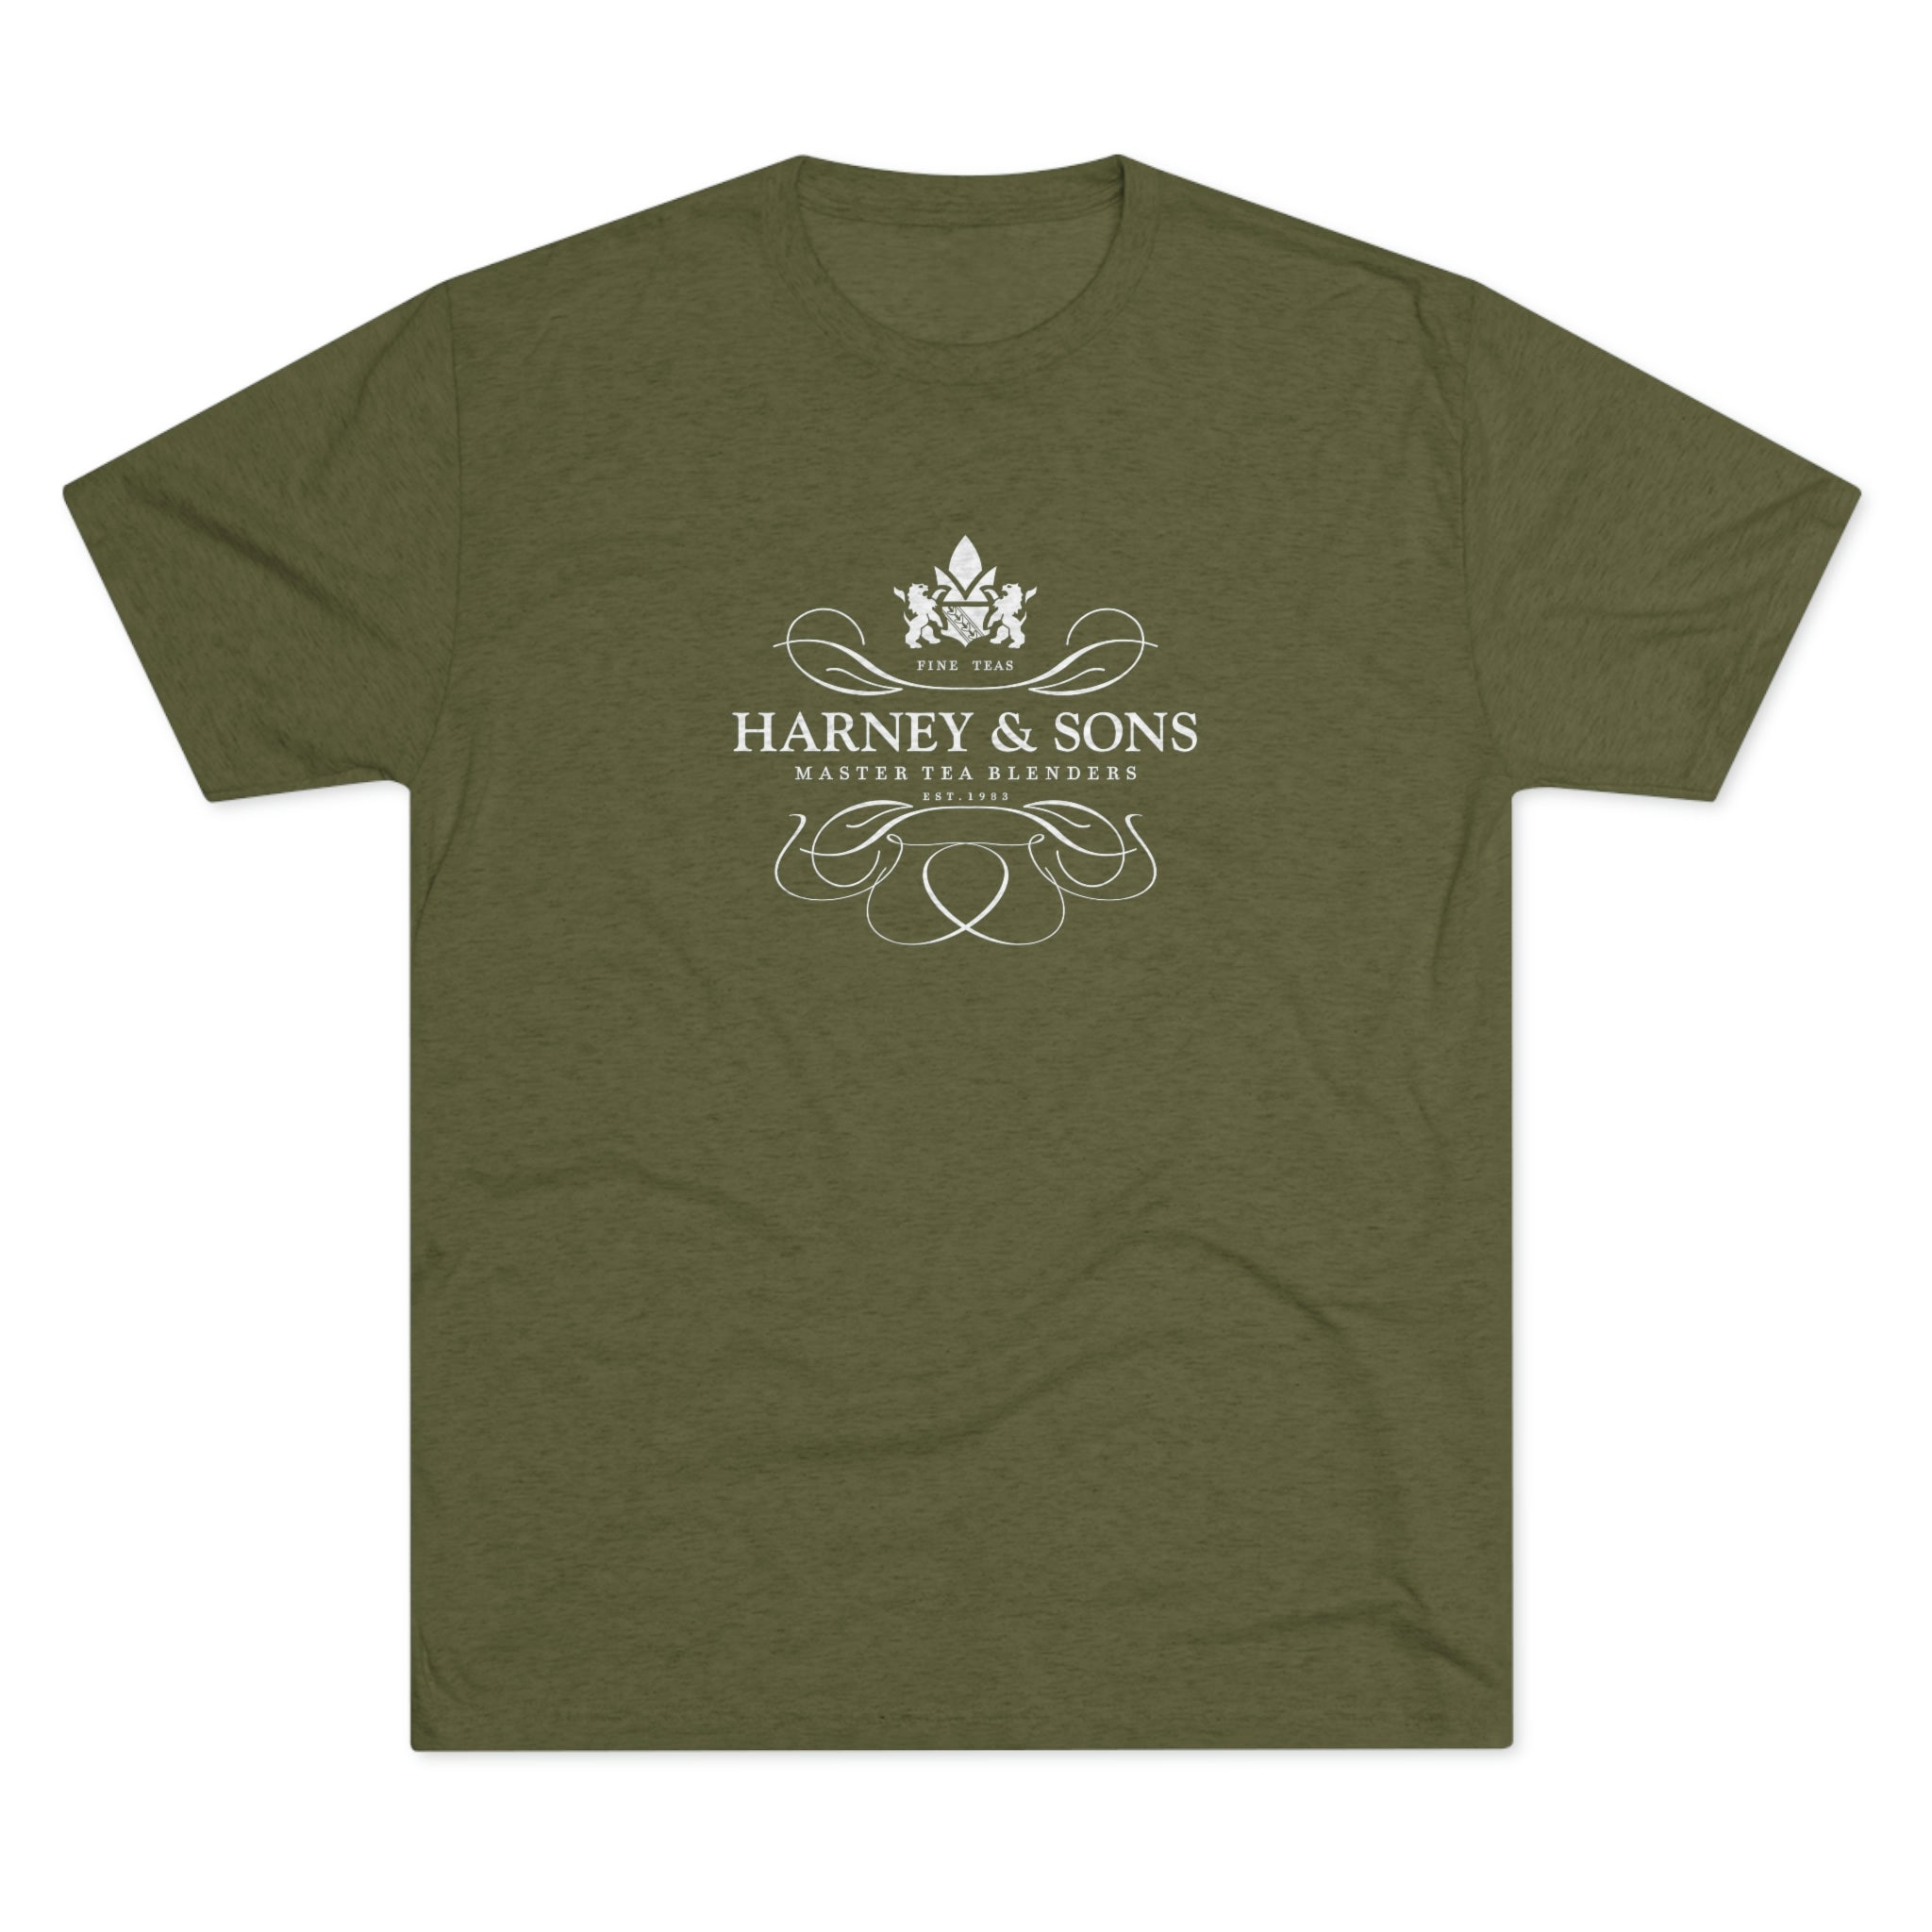 Harney & Sons Logo Graphic Tee - Tri-Blend Military Green S - Harney & Sons Fine Teas